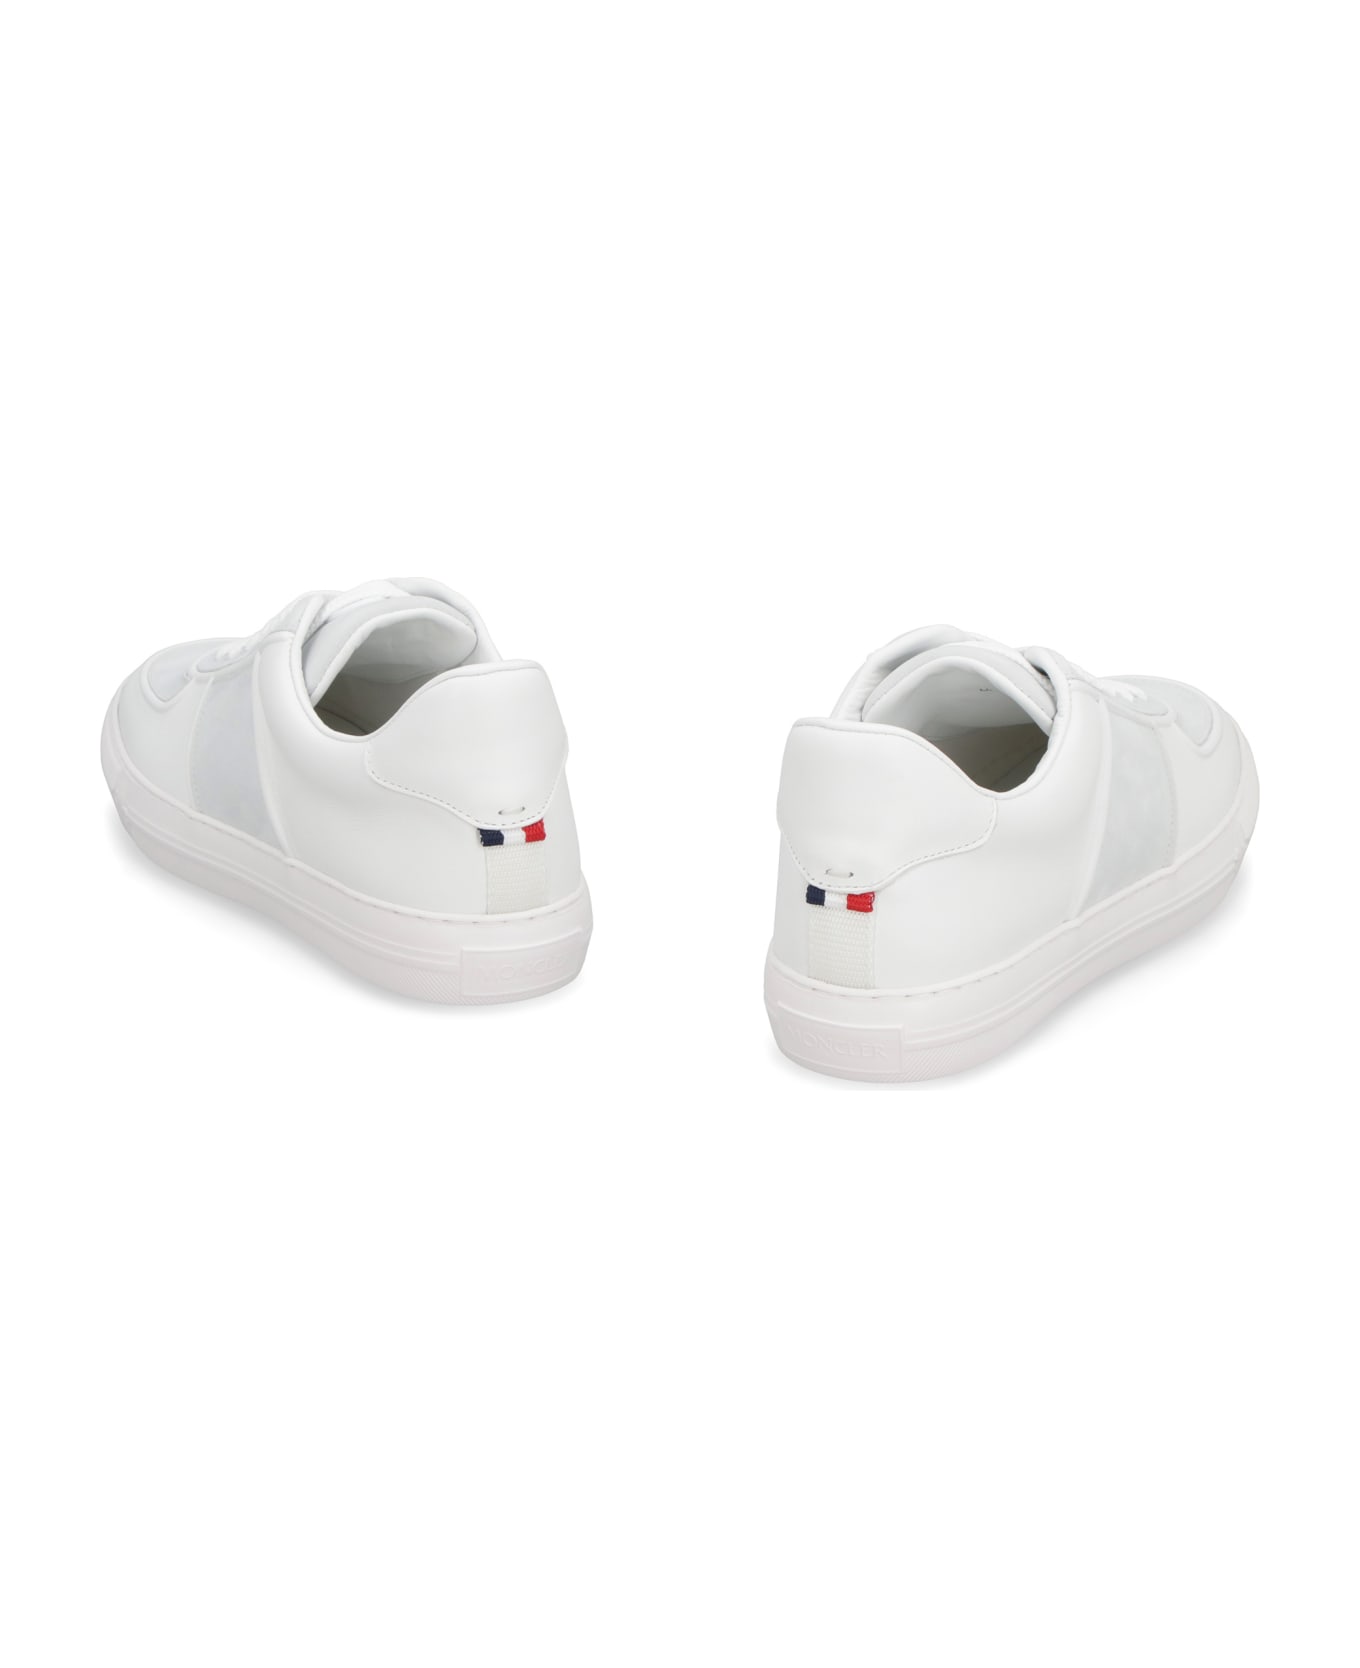 Moncler Neue York Low-top Sneakers - White